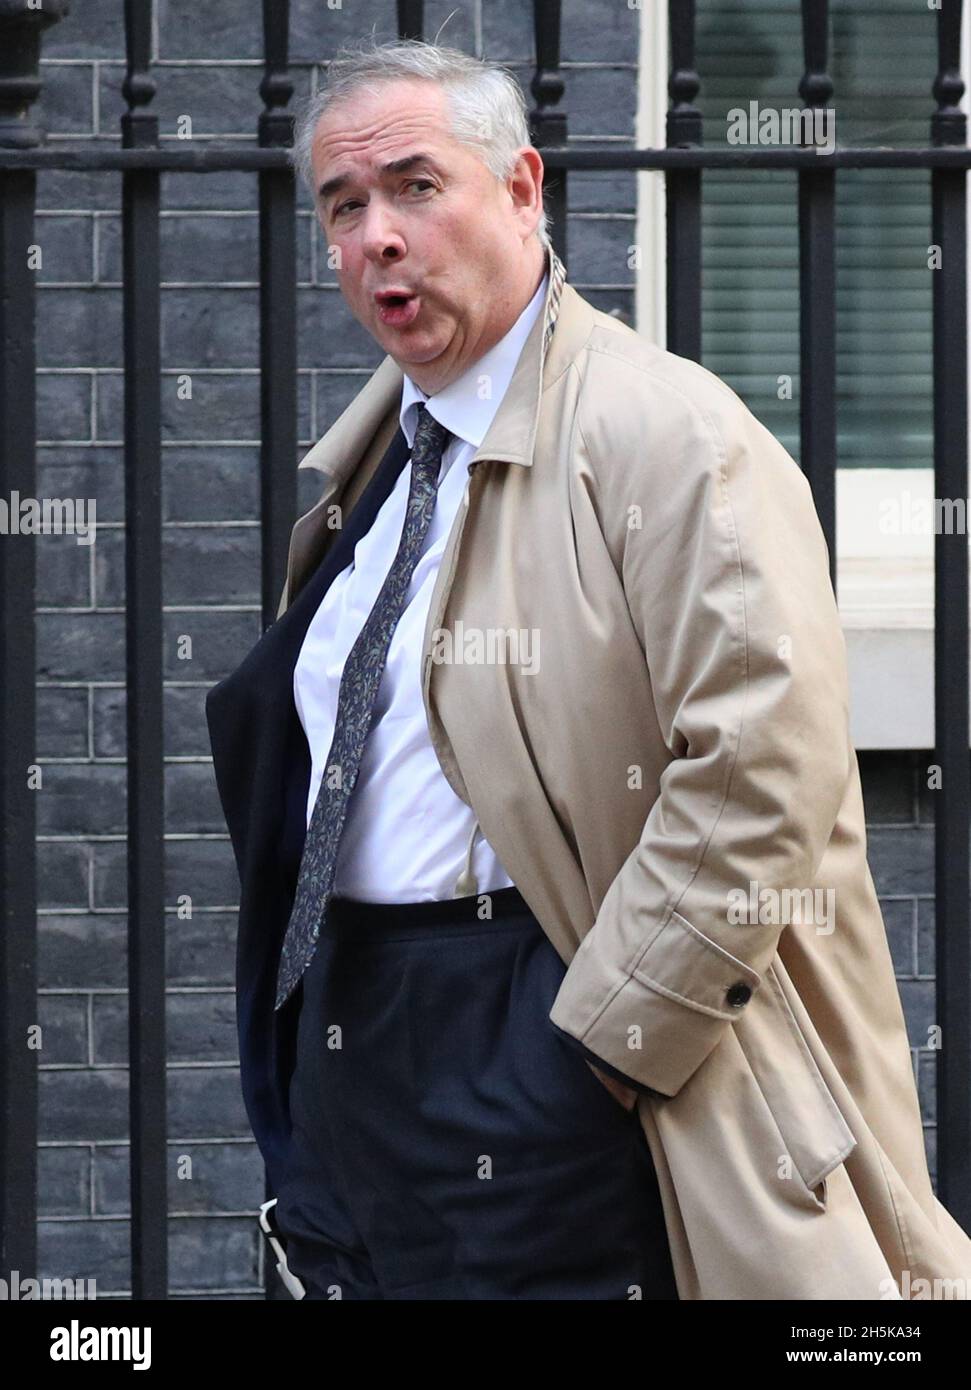 File photo dated 10/9/2019 of the then Attorney General Geoffrey Cox arriving for a cabinet meeting at 10 Downing Street, London. The MP for Torridge and West Devon has said he does not believe he has breached parliamentary rules after a video emerged appearing to show him undertaking external work from his Westminster office. Issue date: Wednesday November 10, 2021. Stock Photo